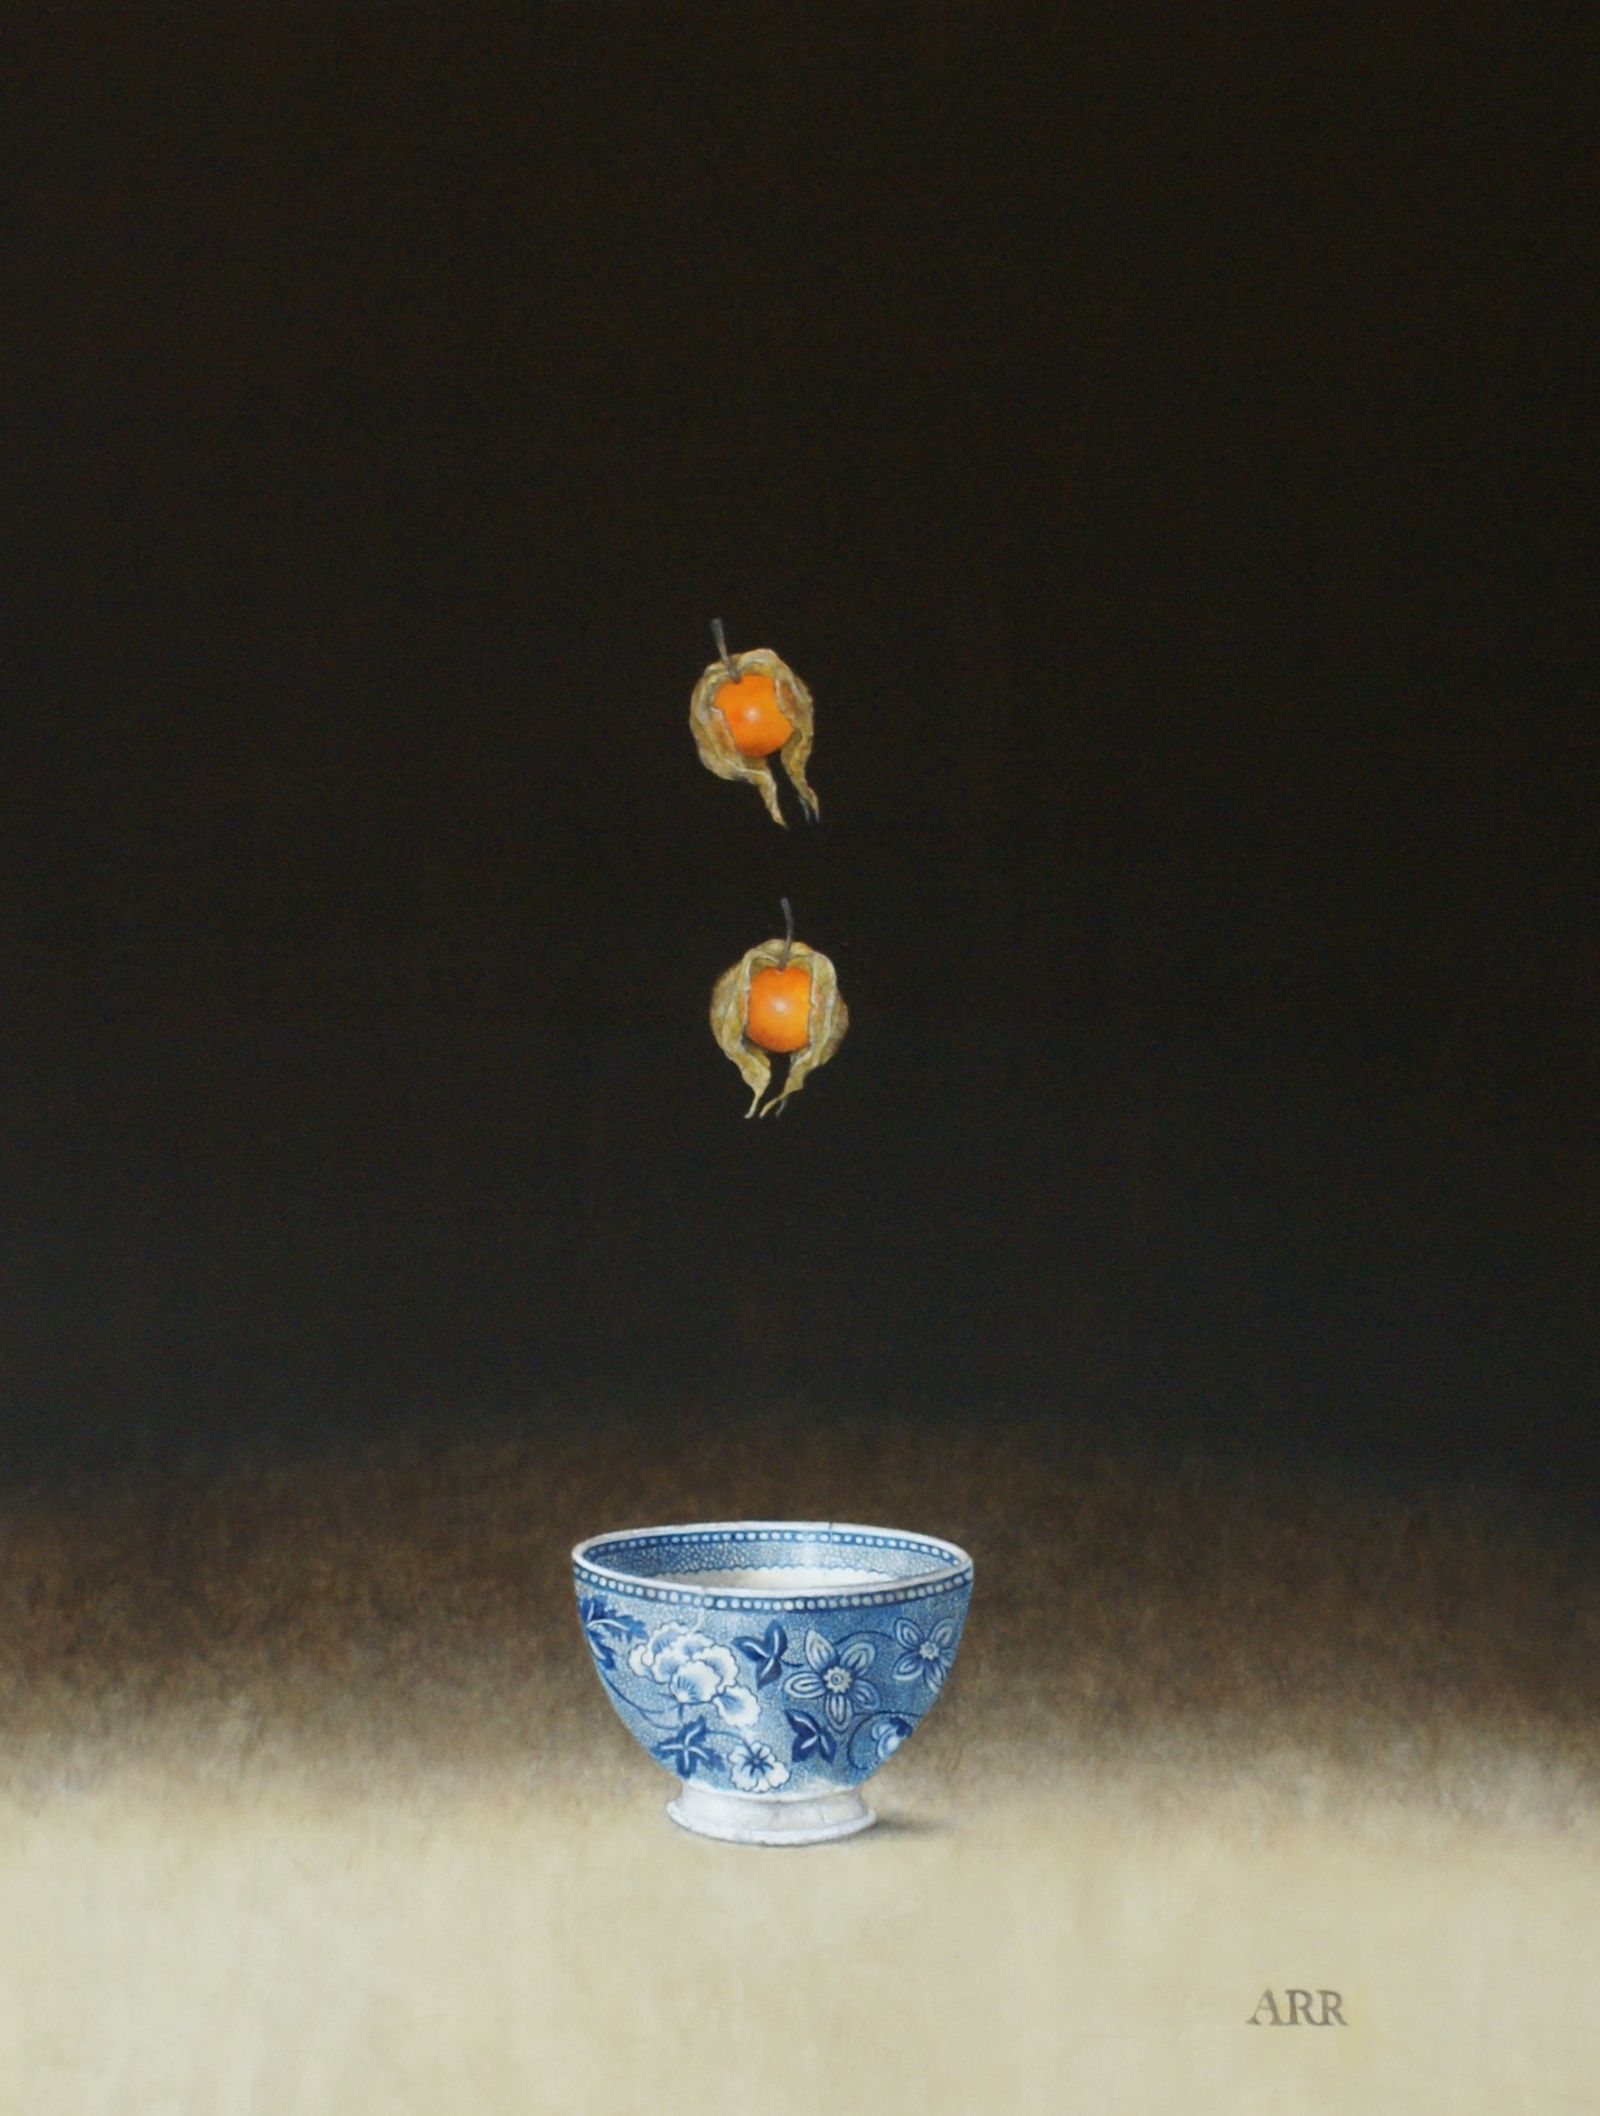 Victorian Bowl with Falling Physalis by Alison Rankin